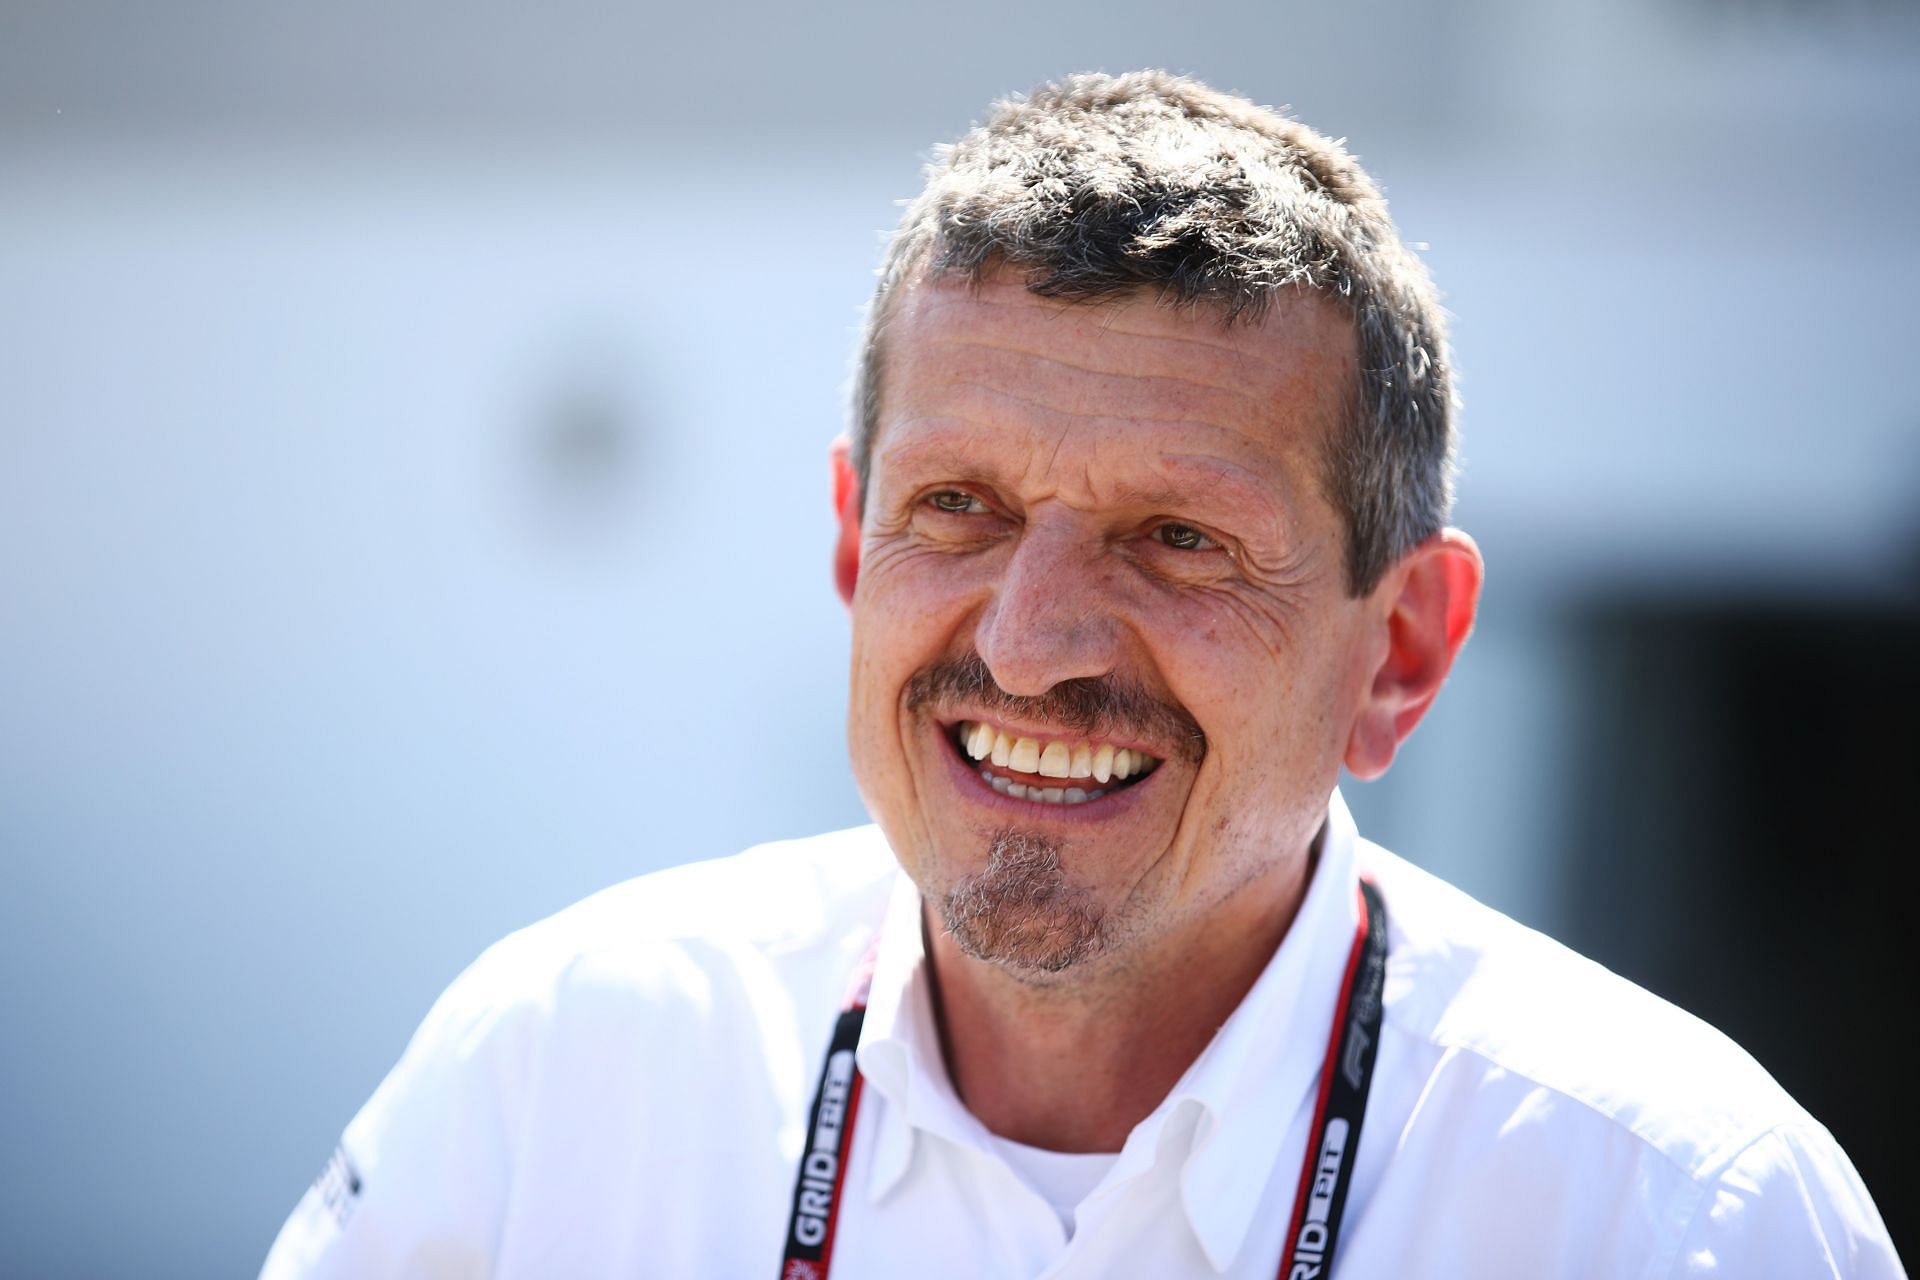 Haas F1 team principal Guenther Steiner looks on in the Paddock in Budapest, Hungary (Photo by Mark Thompson/Getty Images)